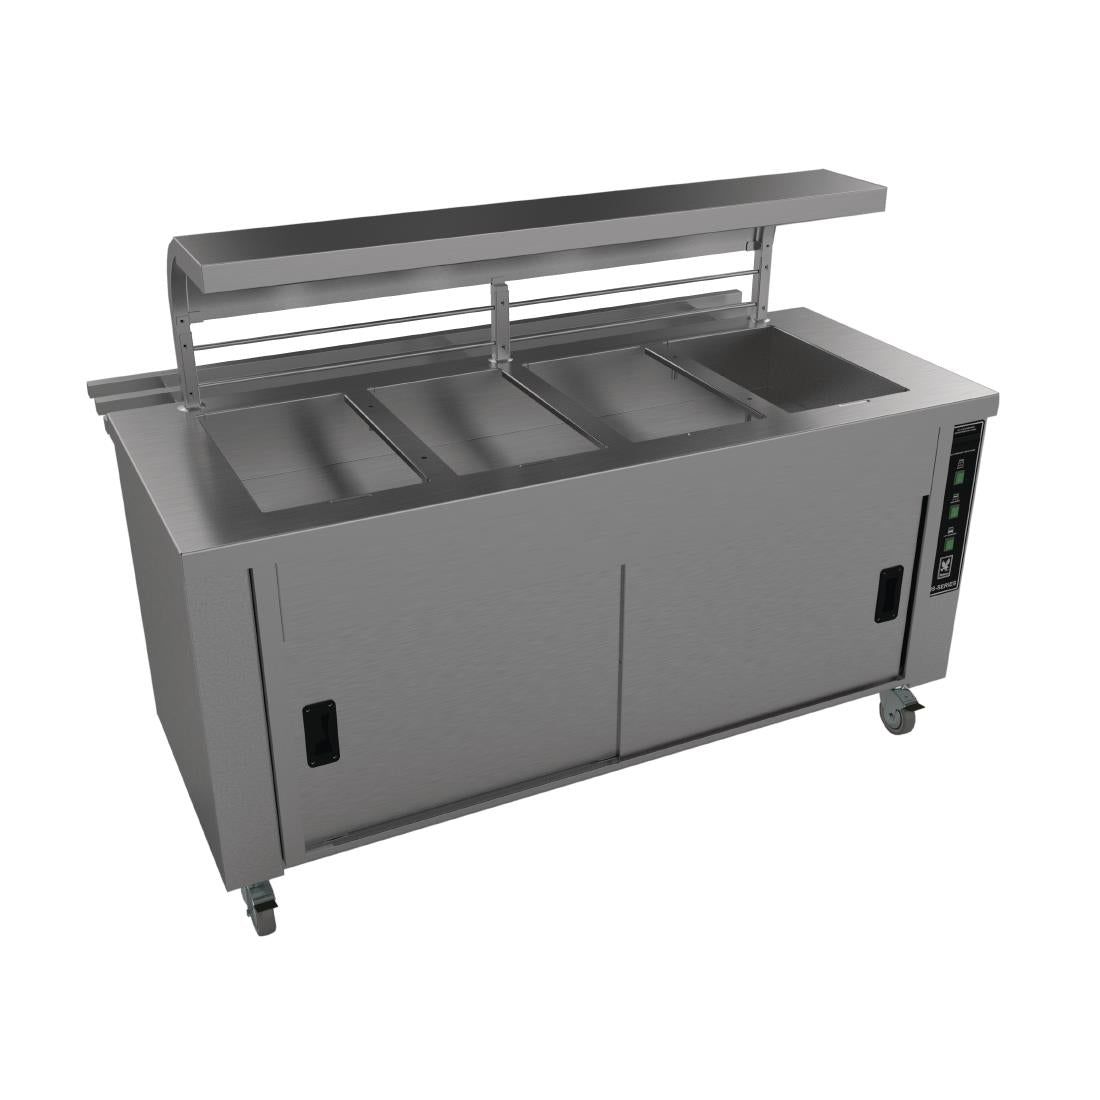 Falcon Chieftain 4 Well Heated Servery Counter with Trayslide HS4